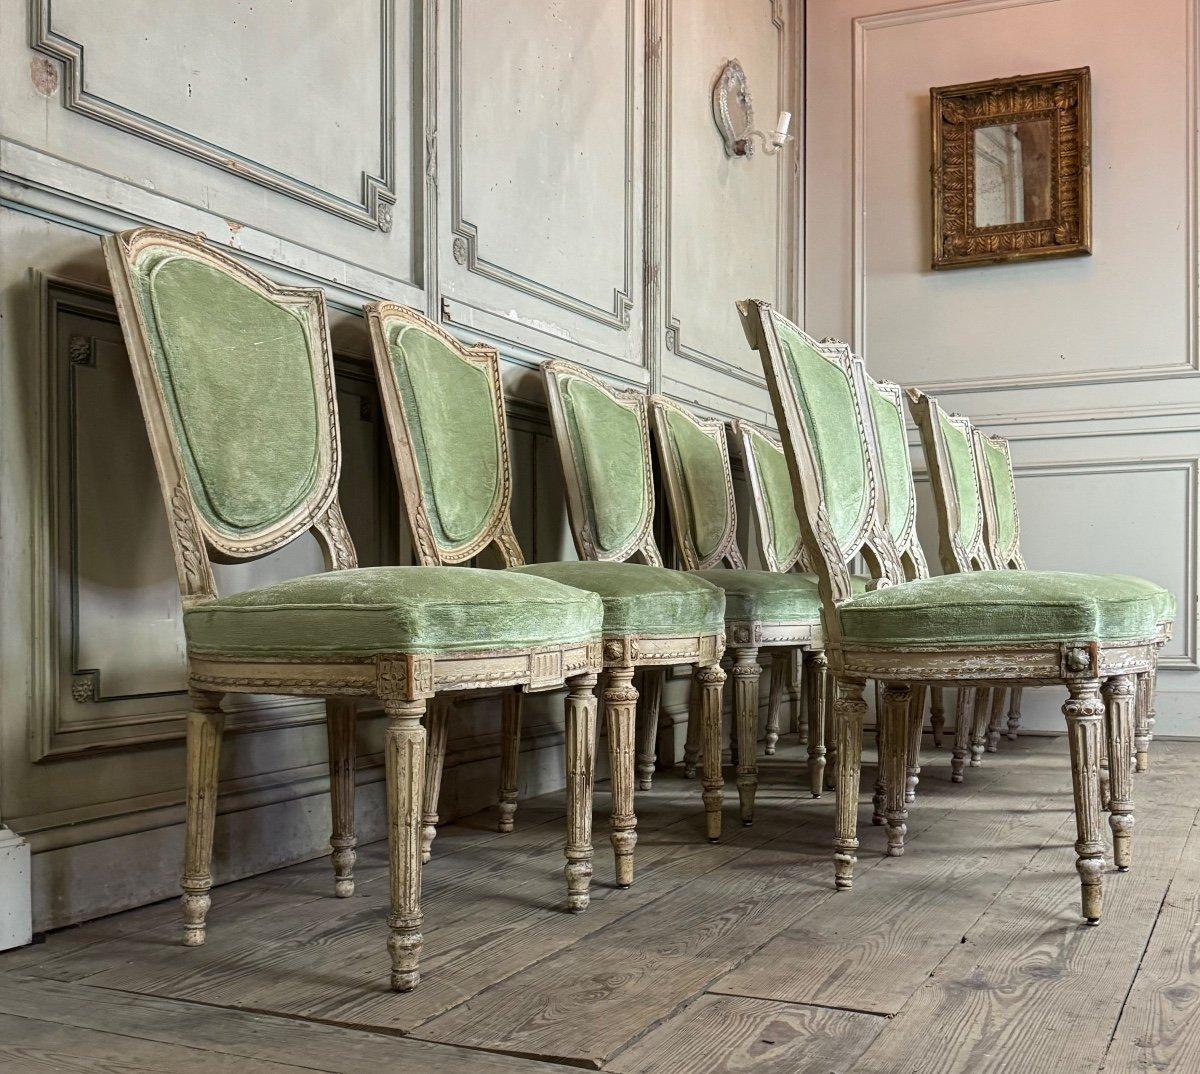 Suite Of 9 Louis XVI Chairs In Carved Wood Rechampi De Beige, 18th Century 

New upholstery with Frey struck velvet.

One chair is slightly different.